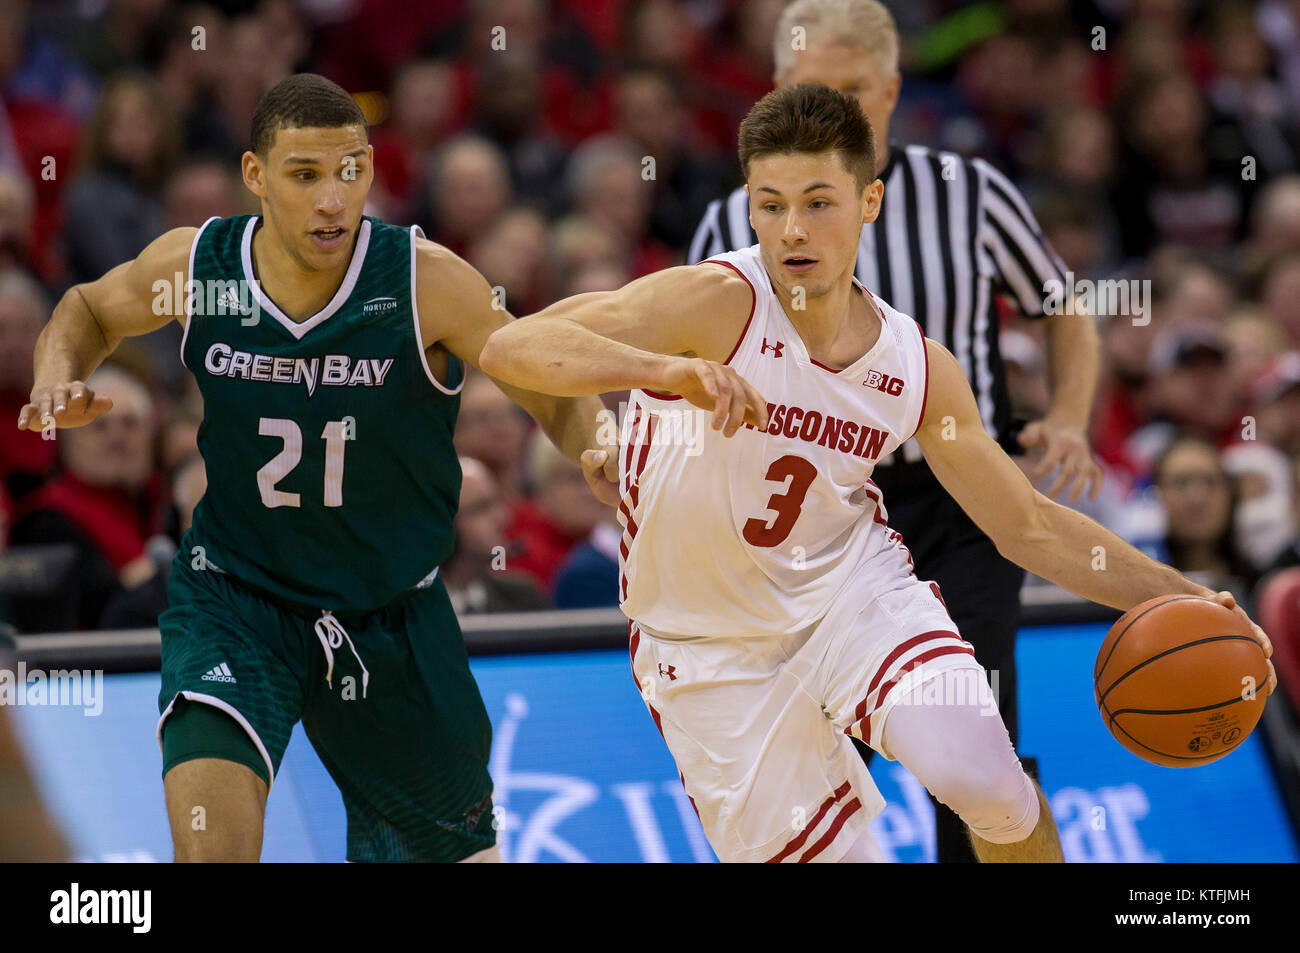 Madison, WI, USA. 23rd Dec, 2017. Wisconsin Badgers guard Walt McGrory #3 drives past Green Bay Phoenix guard Kameron Hankerson #21 during the NCAA Basketball game between the Green Bay Phoenix and the Wisconsin Badgers at the Kohl Center in Madison, WI. Wisconsin defeated Green Bay 81-60. John Fisher/CSM/Alamy Live News Stock Photo